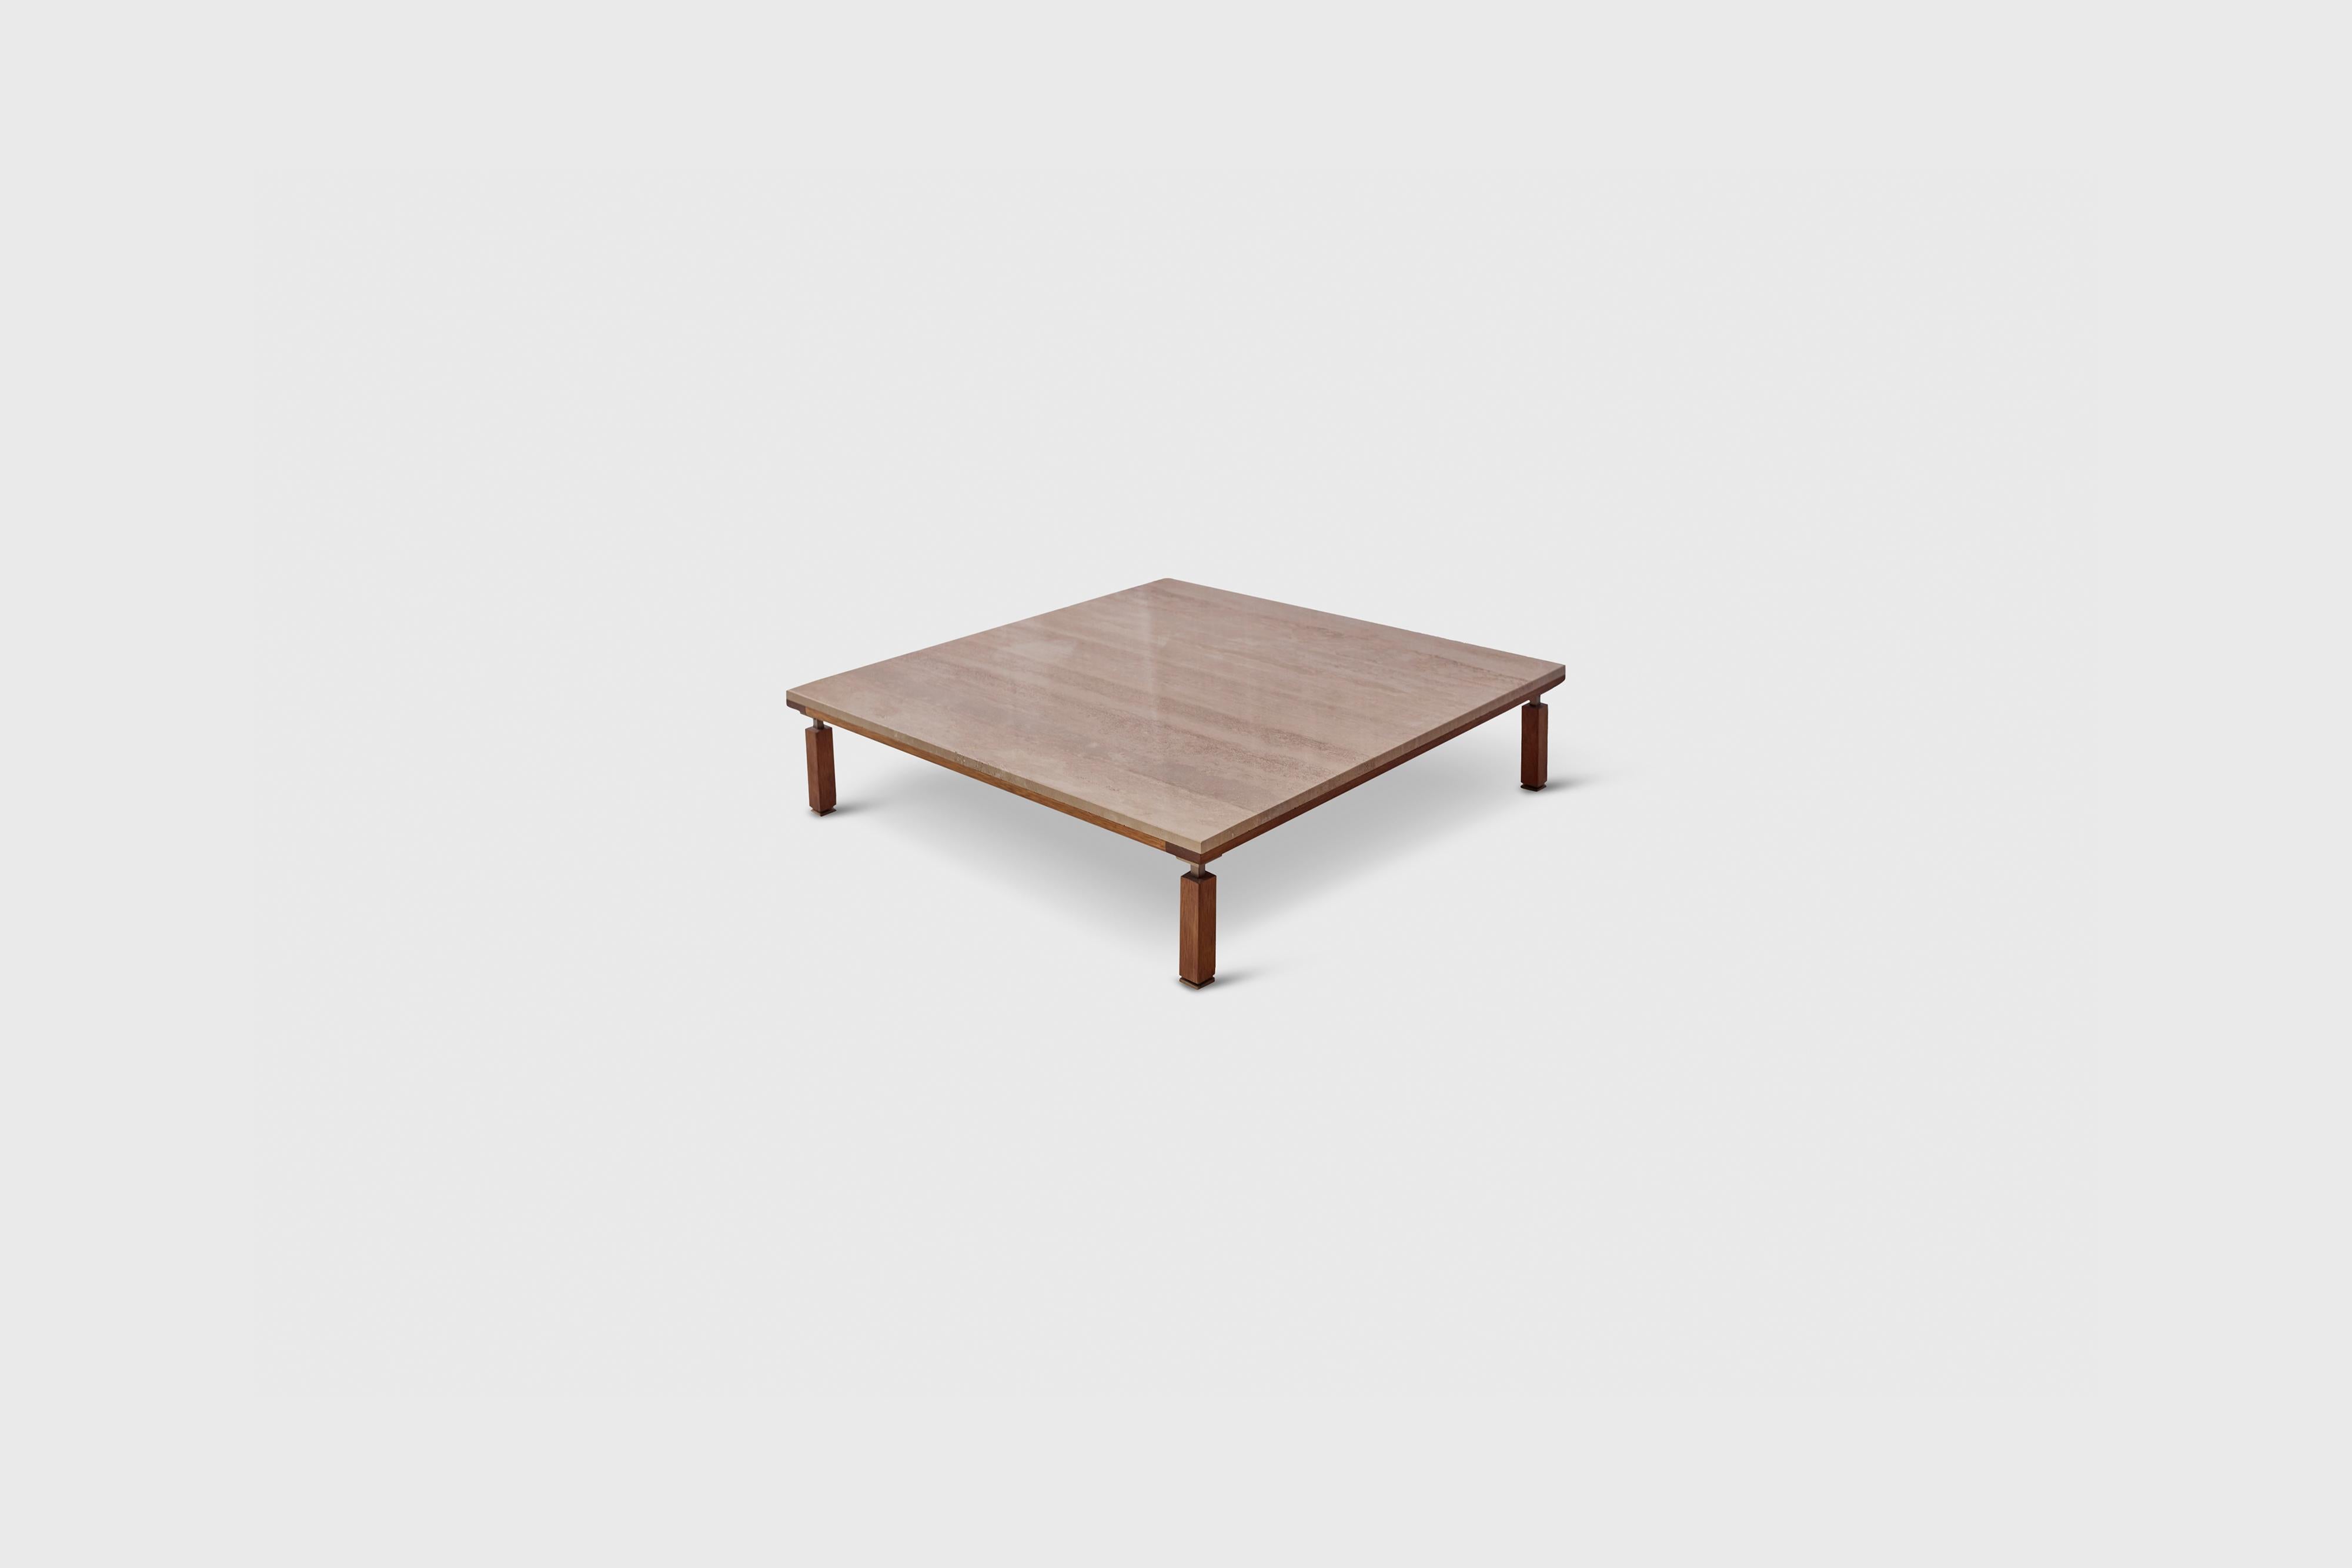 Nerthus coffee table
Stone Top with Wood Base and Brass Details
Designer - Alexander Diaz Anderson 

L 108.5cm / 42.7